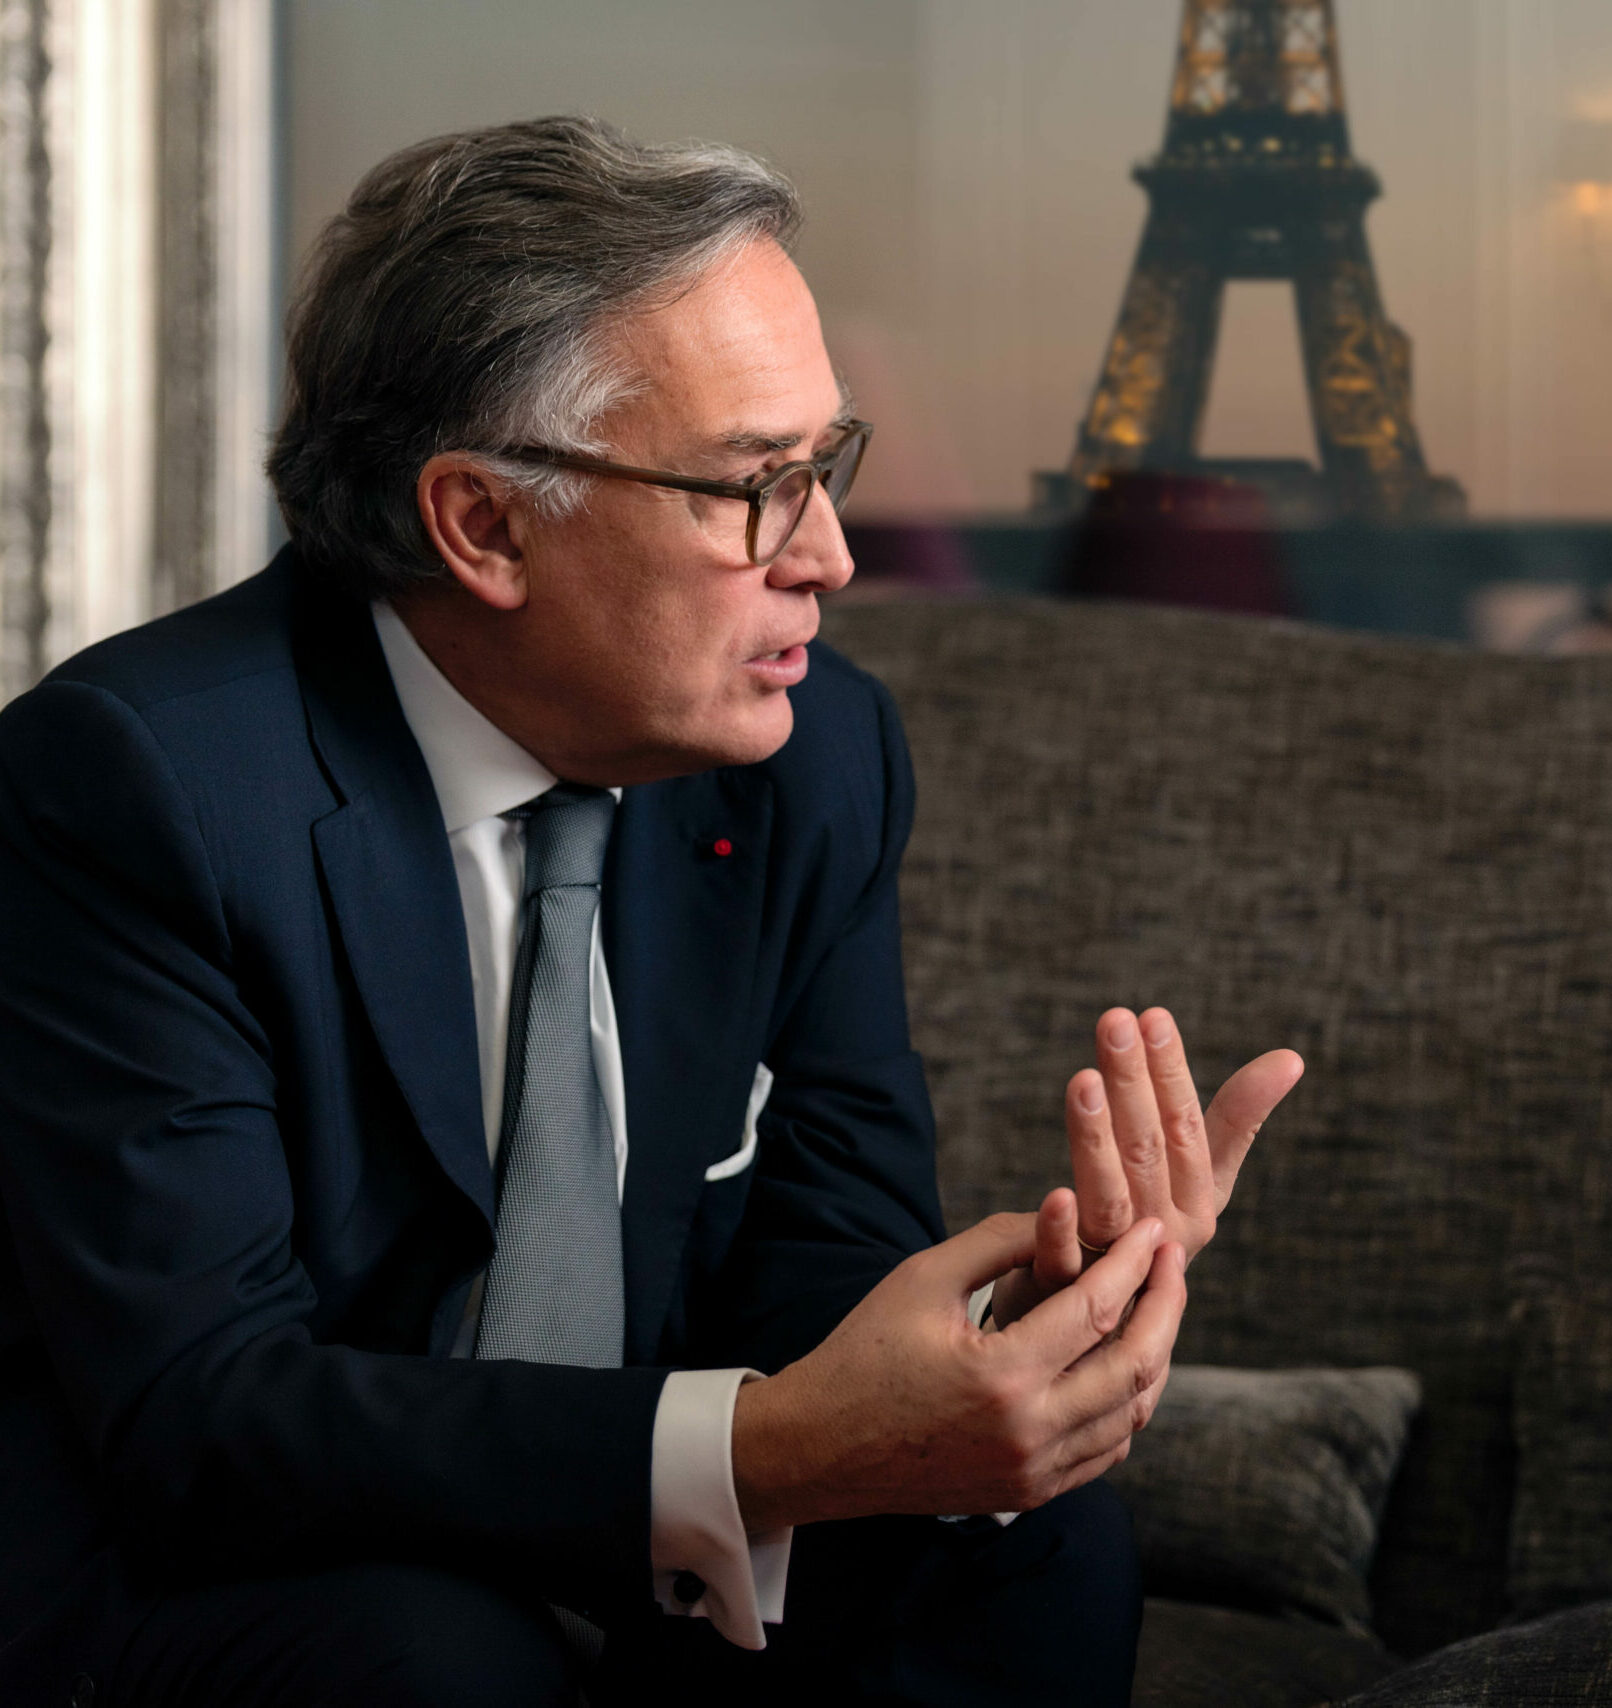 François Delahaye, General Manager of Hotel Plaza Athénée and COO of Dorchester Collection